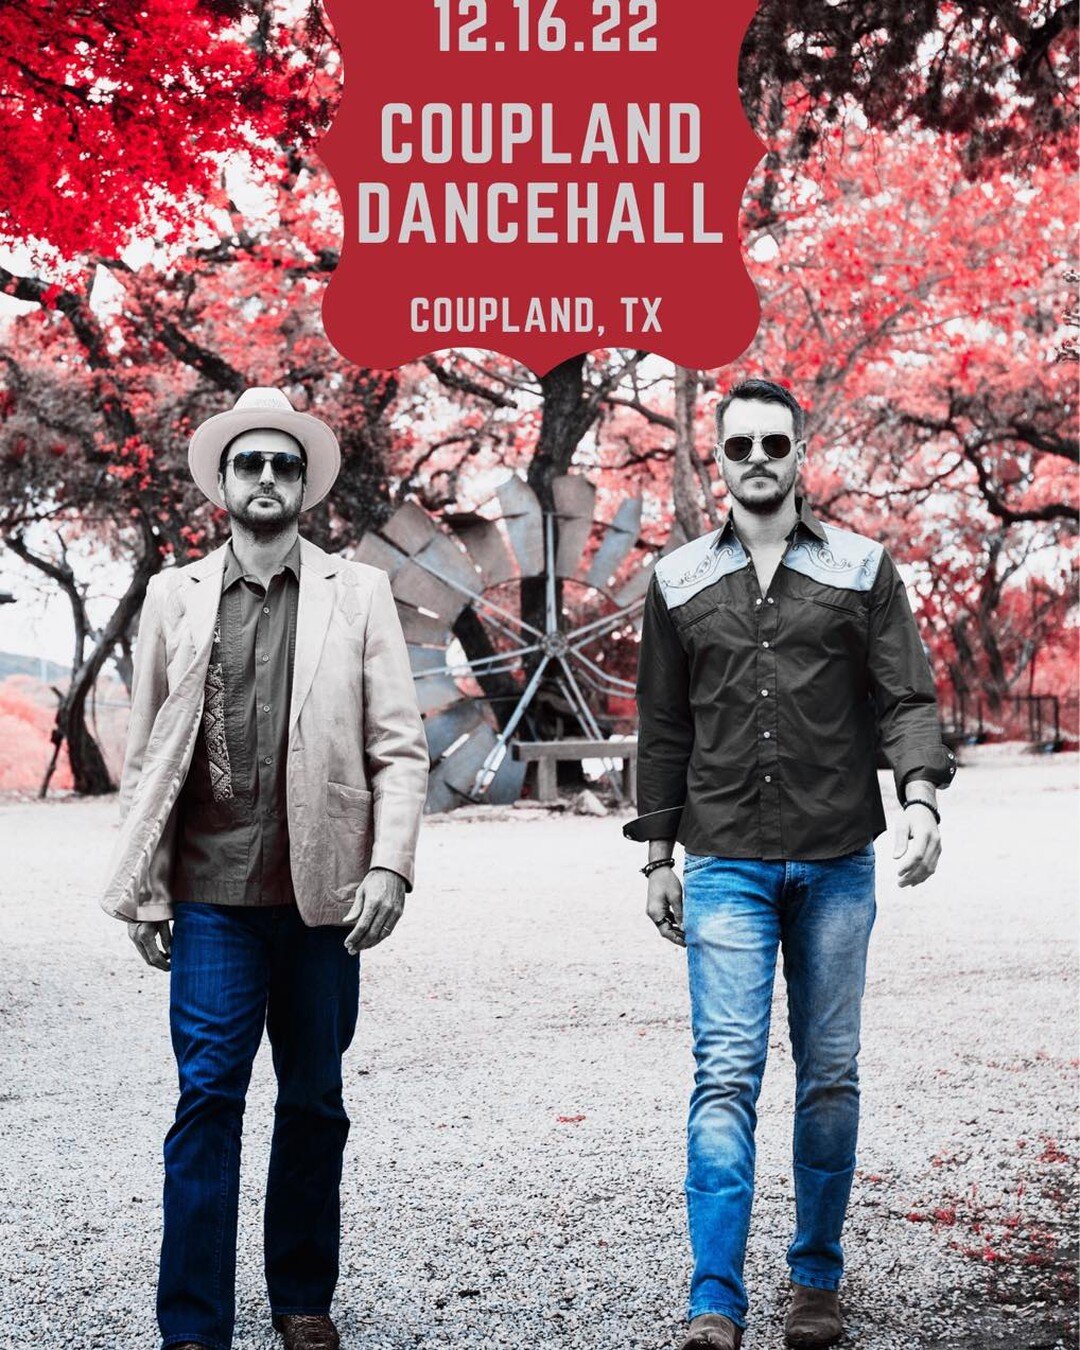 Come join us at the historic Coupland Dancehall on Friday, December 16th! 

Get your tickets below ⬇️⬇️⬇️⬇️

https://tickets.holdmyticket.com/tickets/402610